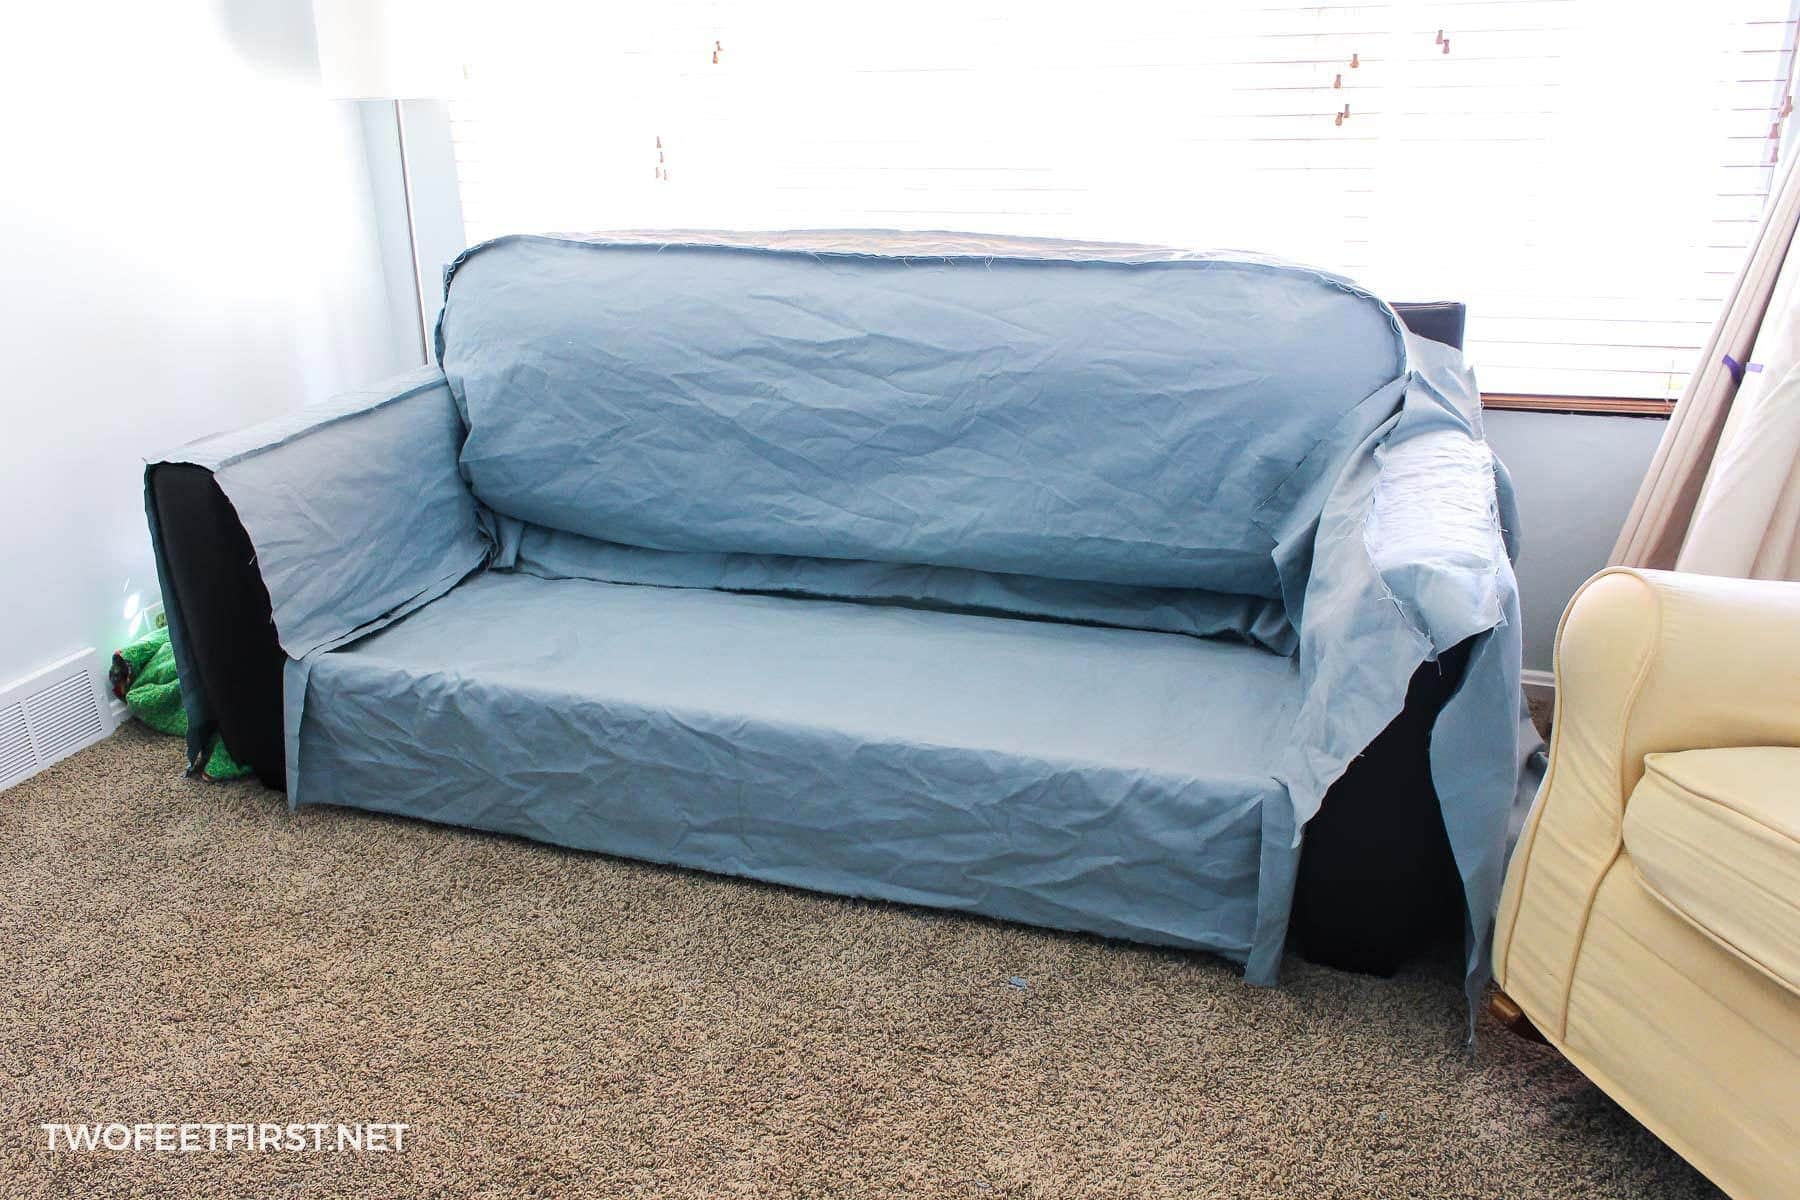 Make Slipcover For A Sofa Diy Couch Cover, How To Cover A Sofa With Sheets